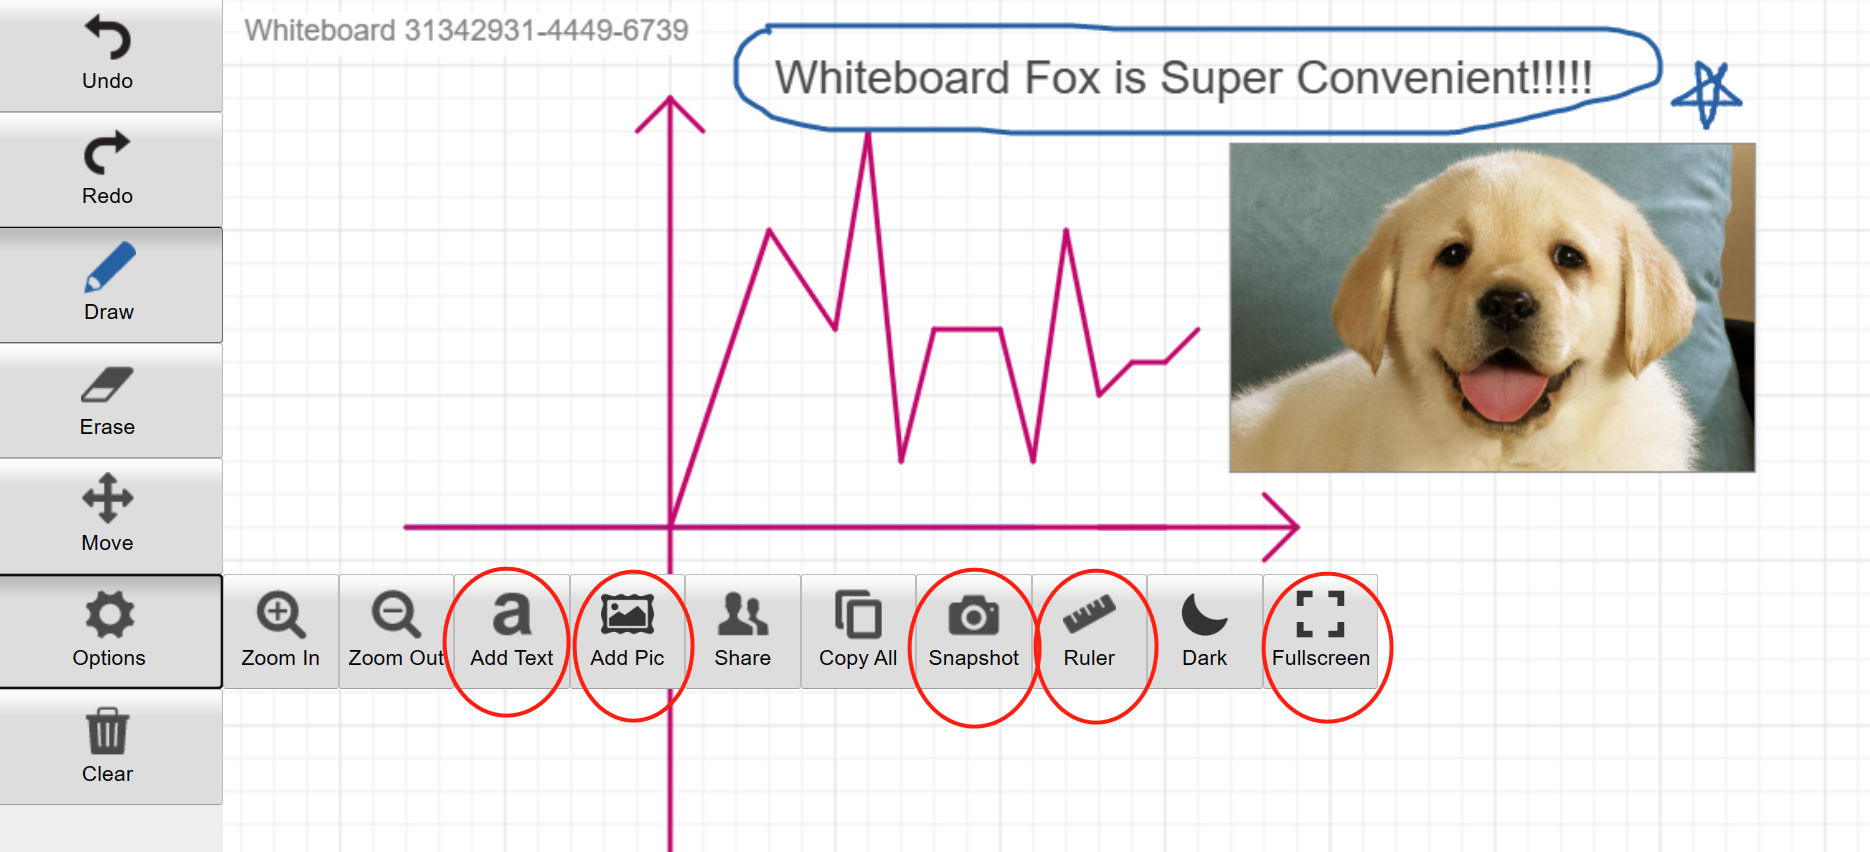 What is Whiteboard Fox and How does it Work